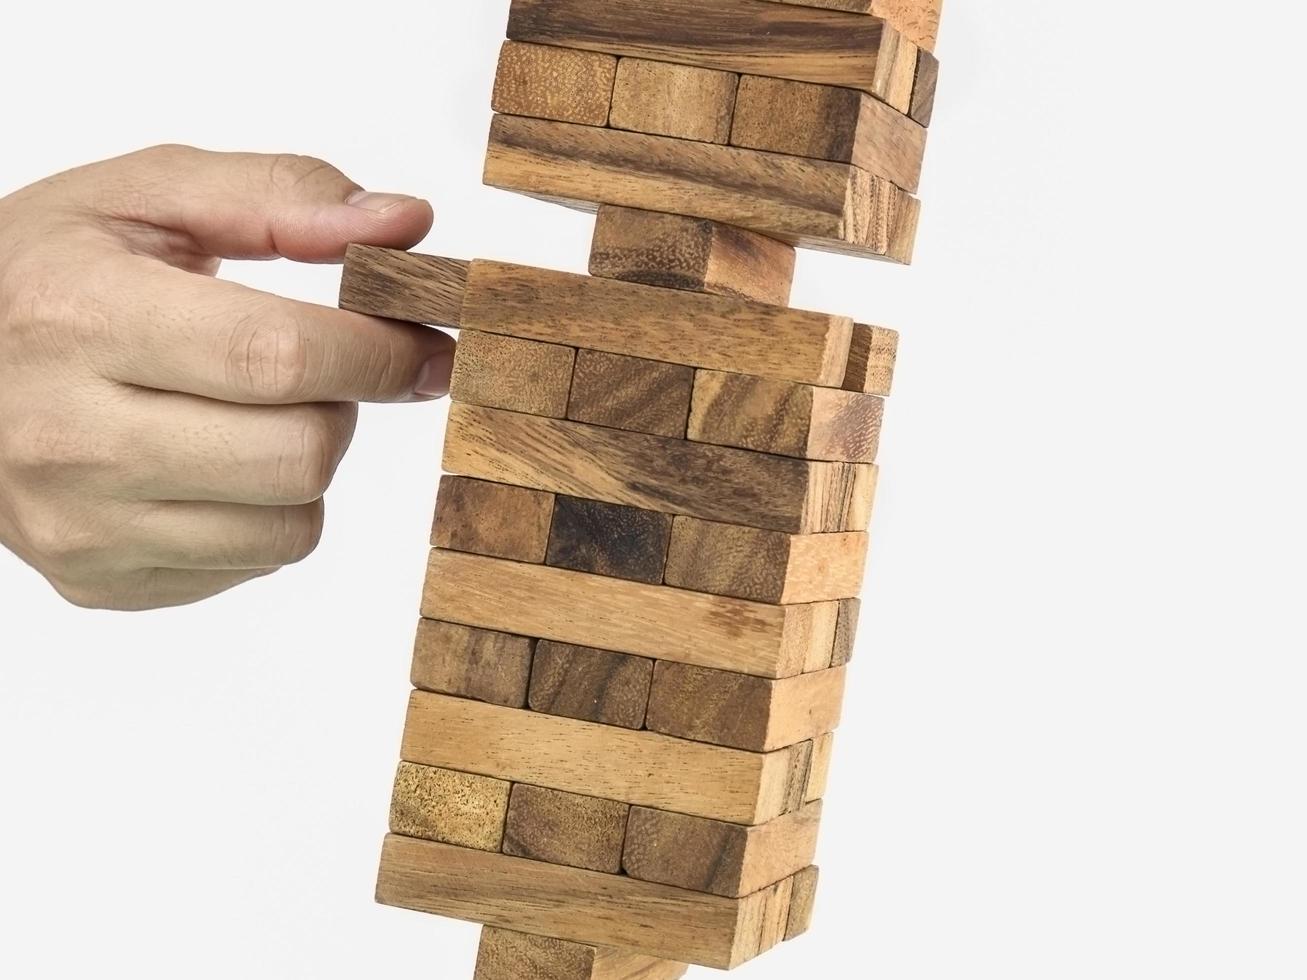 Inclined wooden block tower jenga game with hand, risk concept photo